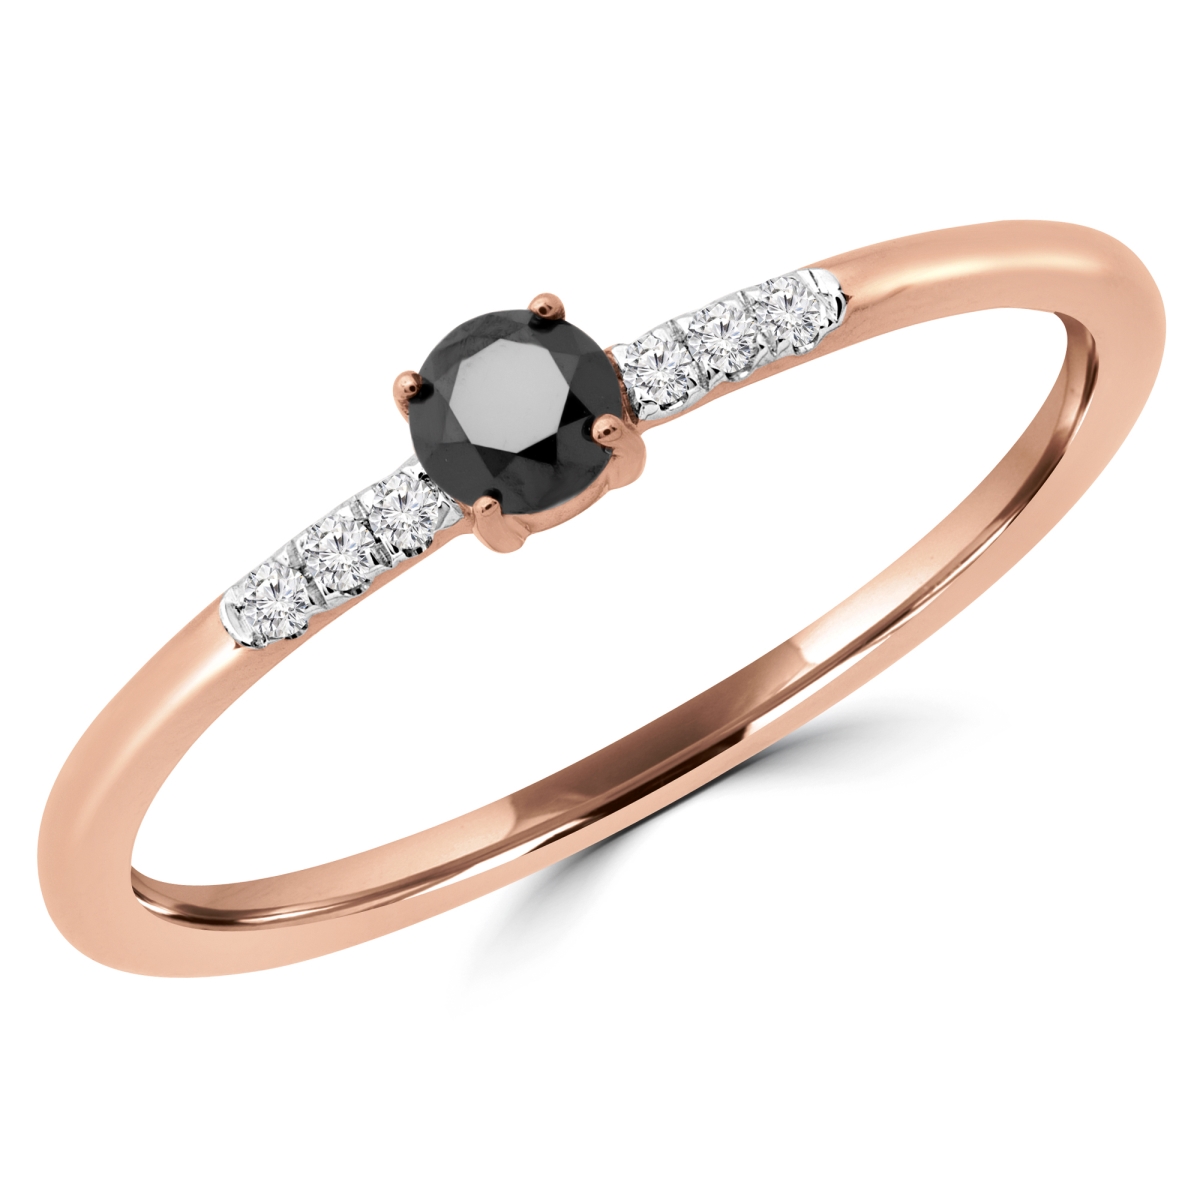 Picture of Majesty Diamonds MDR190079-9 0.16 CTW Round Black Diamond Bezel Set Cocktail Ring in 14K Rose Gold - Size 9